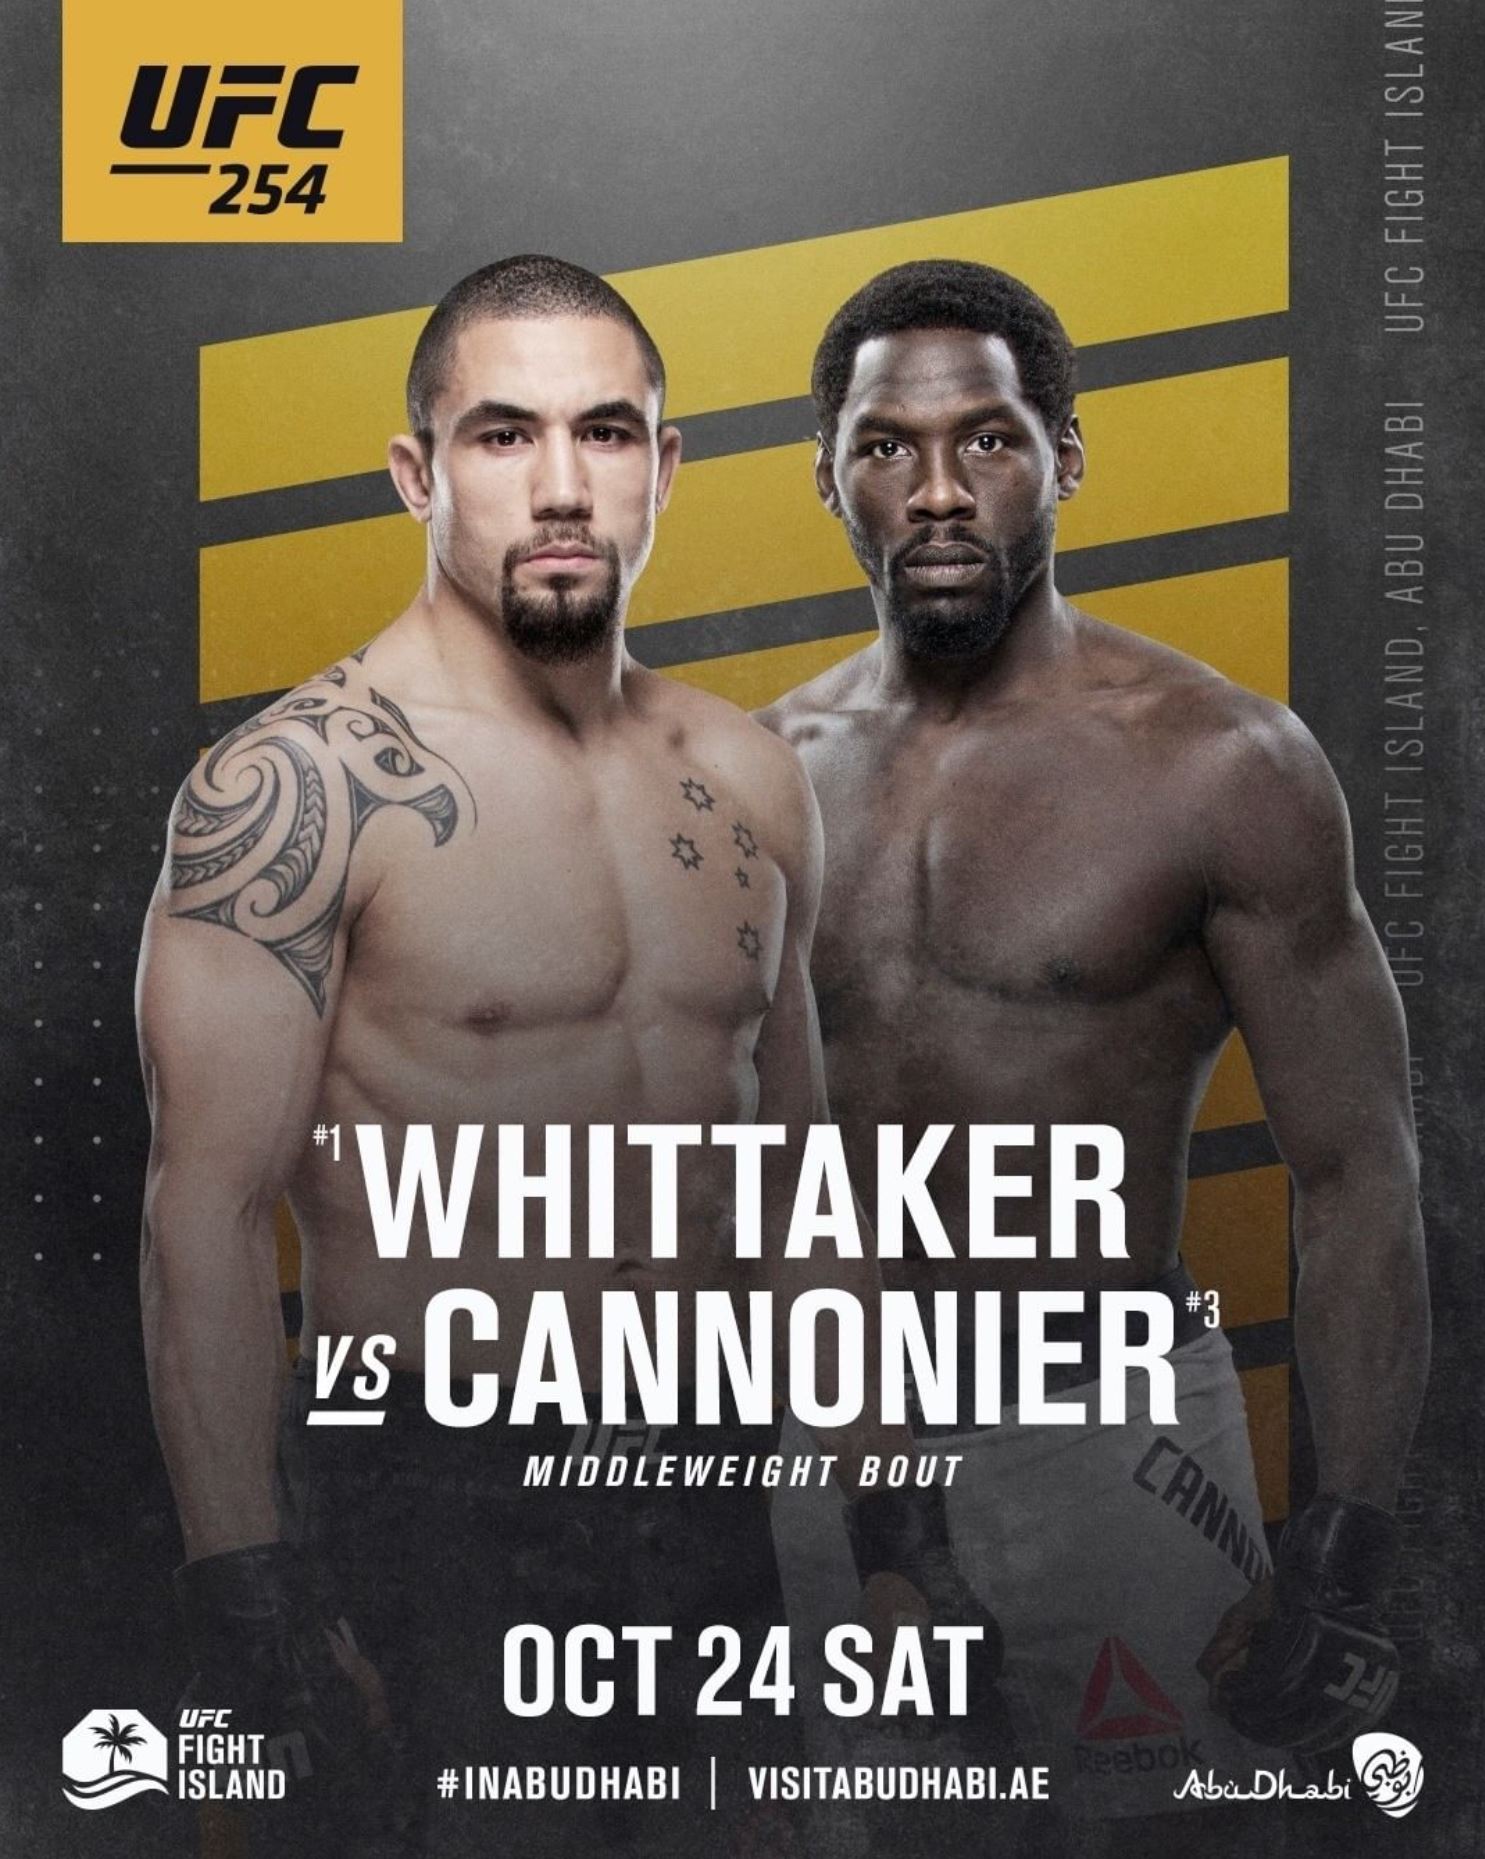 Robert Whittaker vs. Jared Cannonier – Fight Preview & Analysis